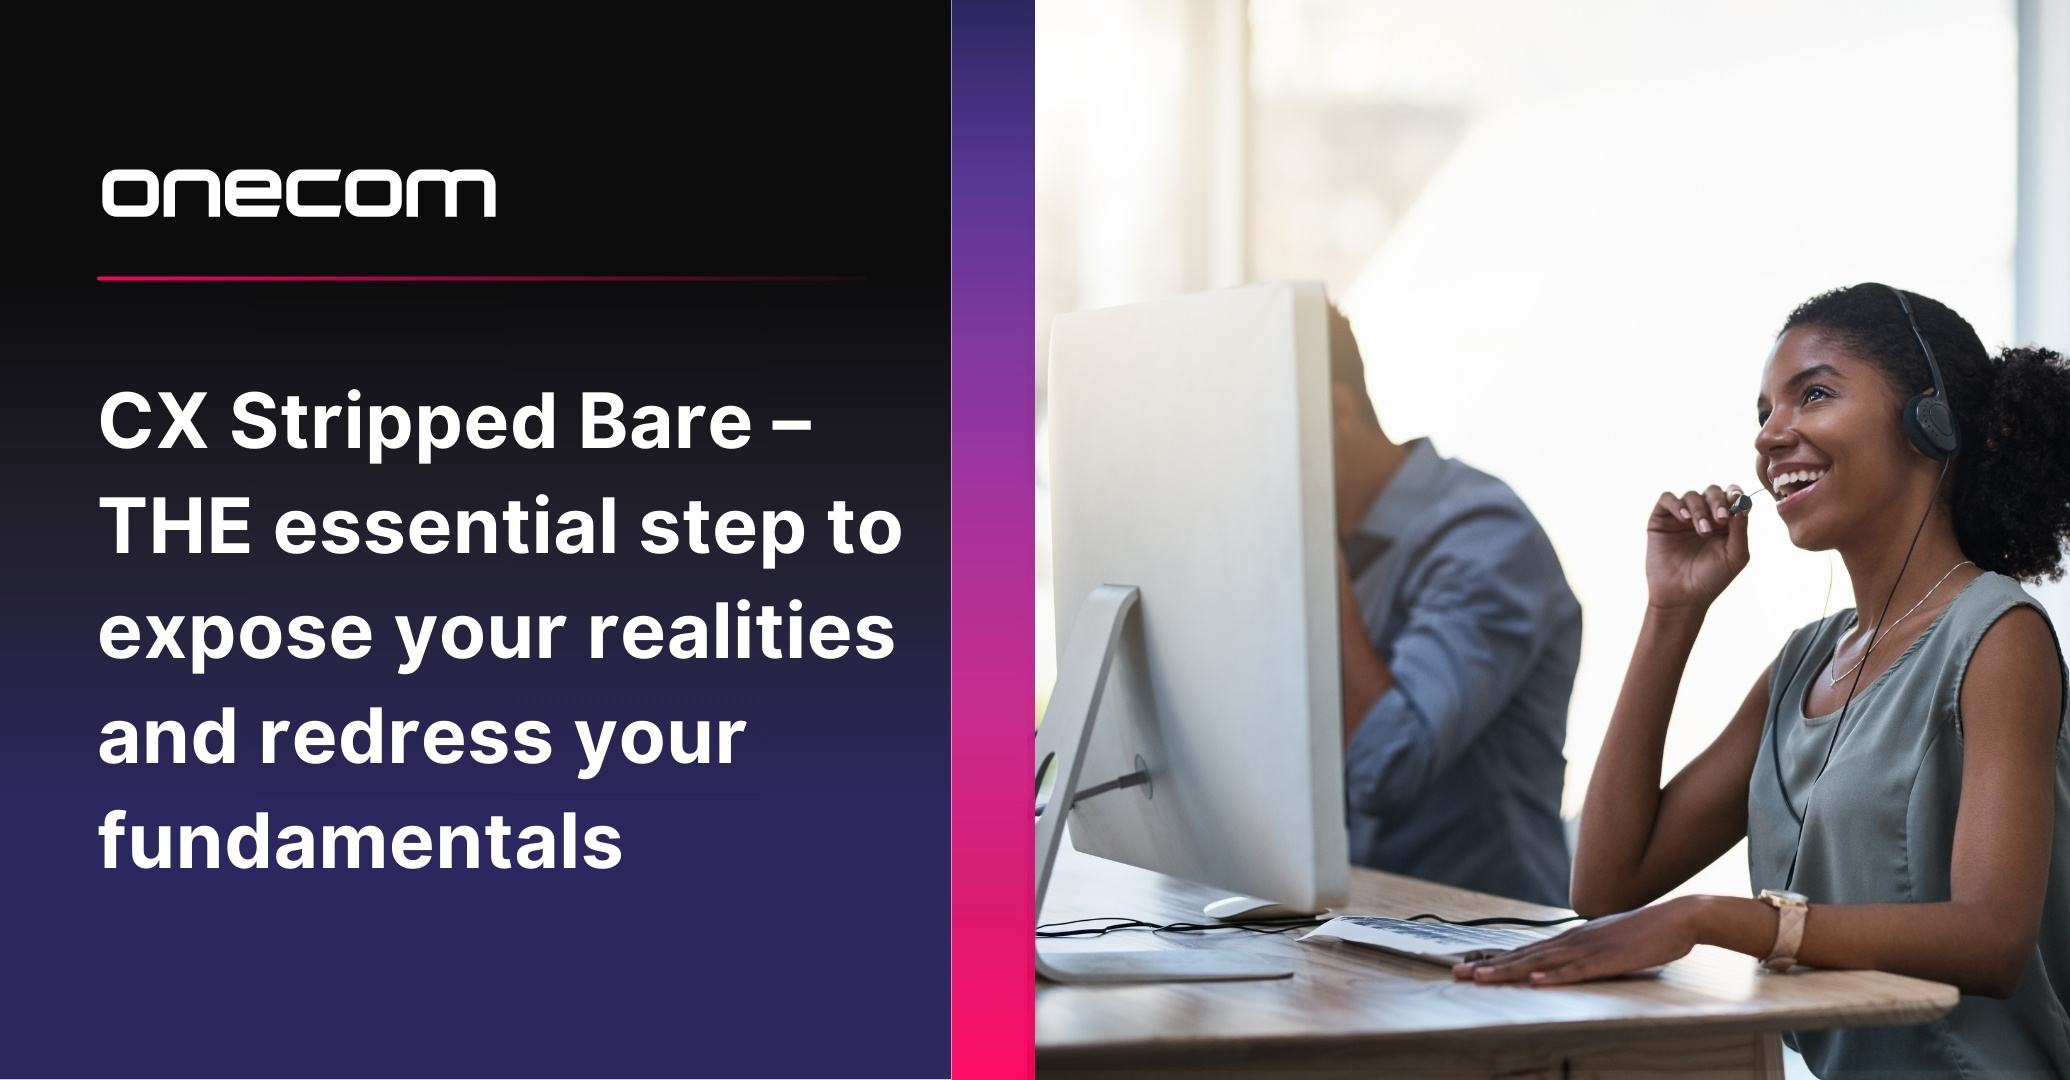 CX Stripped Bare – THE essential step to expose your realities and redress your fundamentals